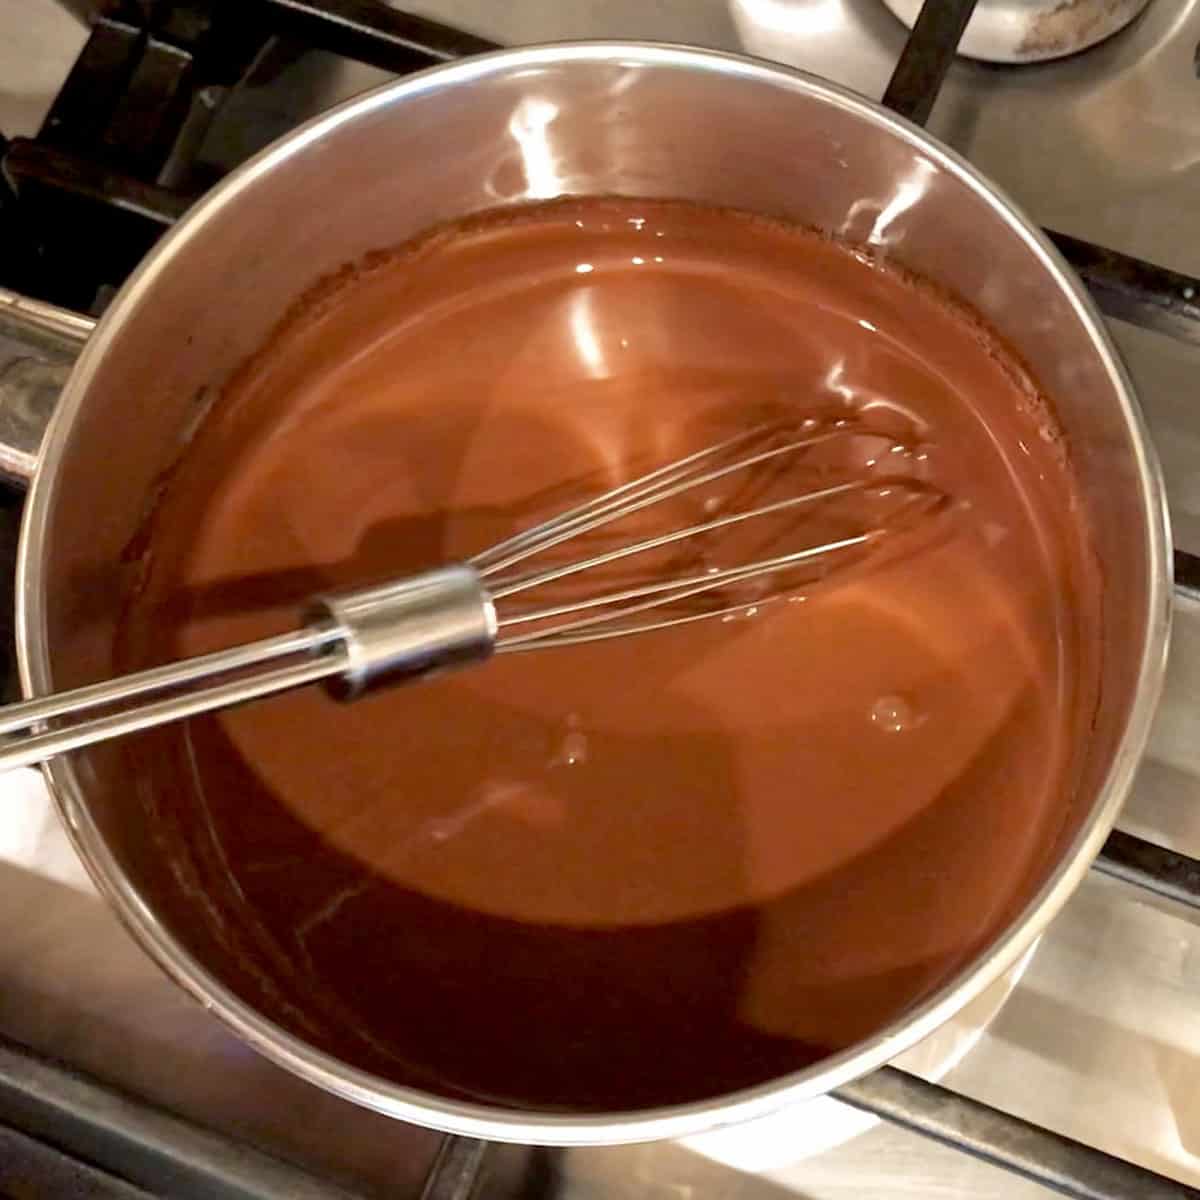 Melting the chocolate mixture on the stovetop.